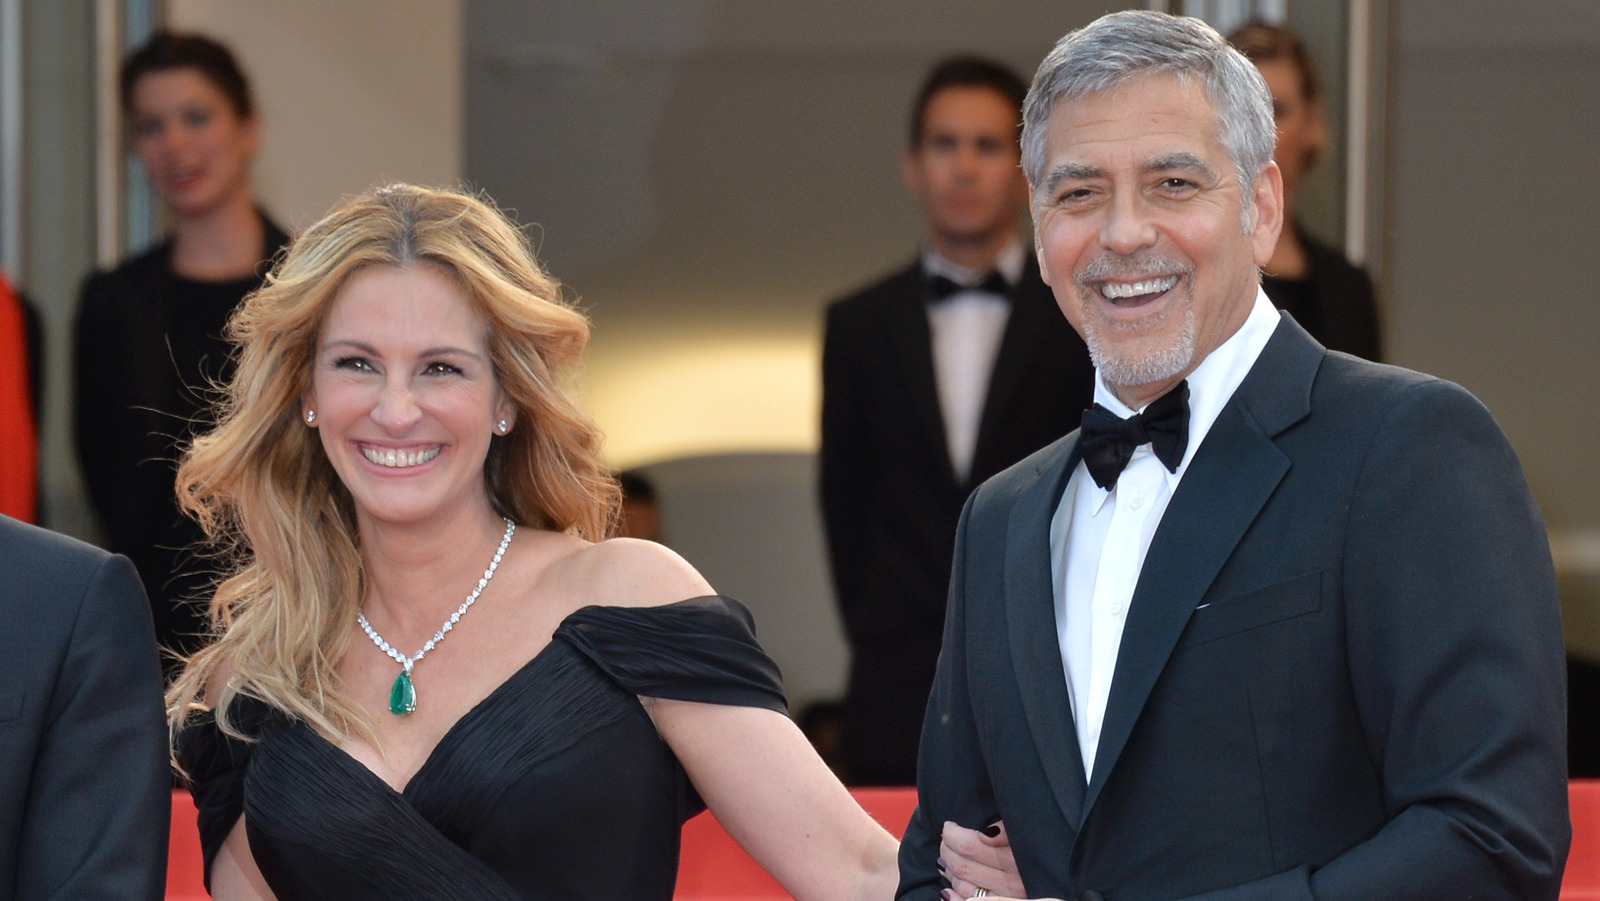 Julia Roberts And George Clooney's Friendship Began With A $20 Bill